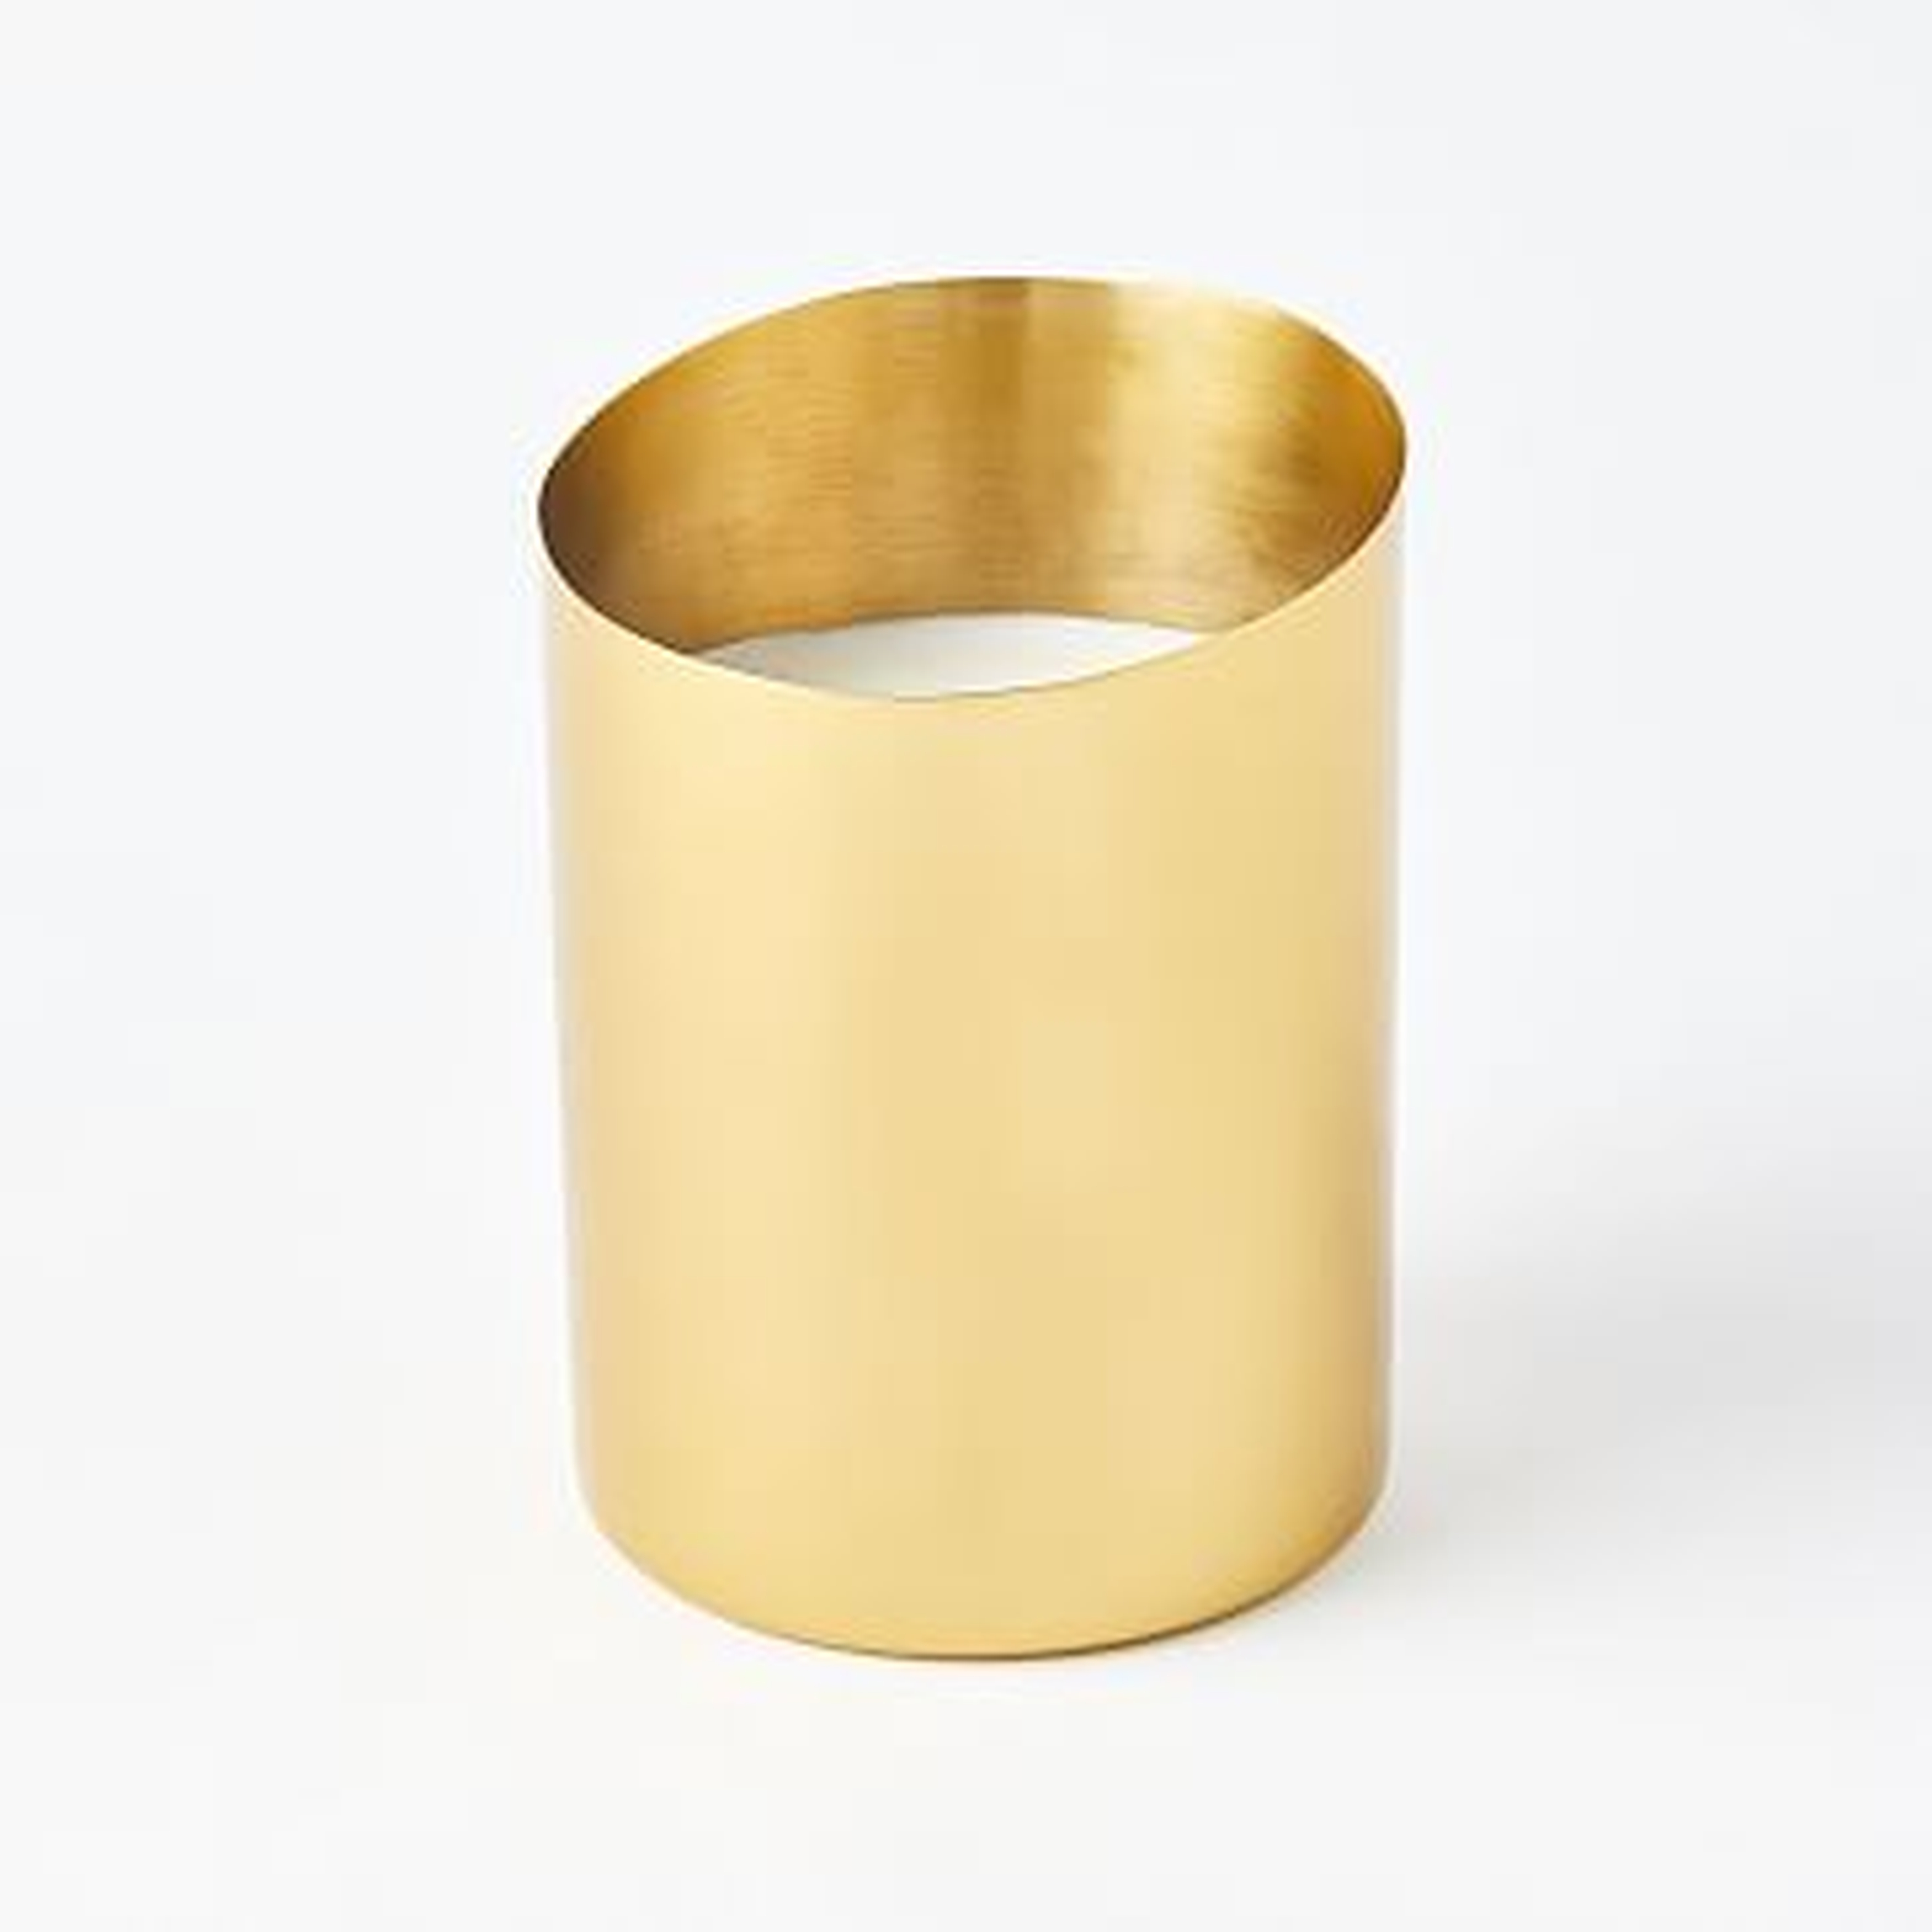 Angled Metal Homescent Collection, Gold, Tall Candle, Tonka Noir - West Elm